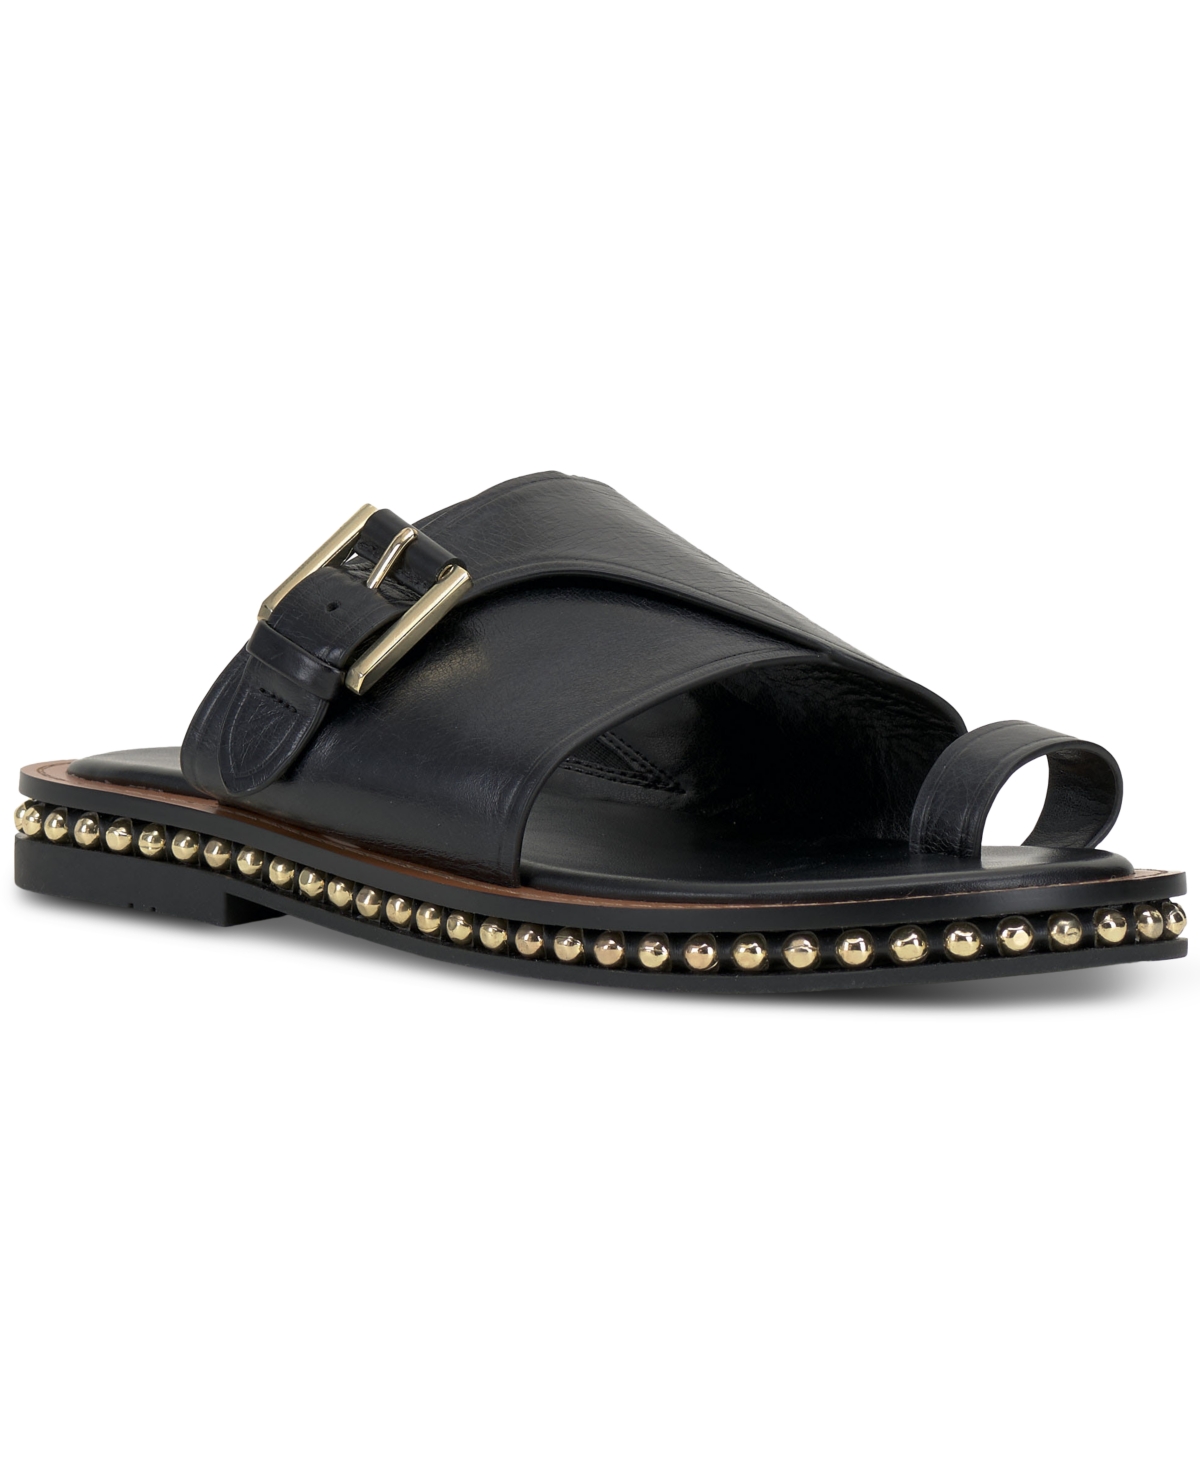 UPC 196672387454 product image for Vince Camuto Women's Cooliann Hooded Thong Flat Sandals Women's Shoes | upcitemdb.com